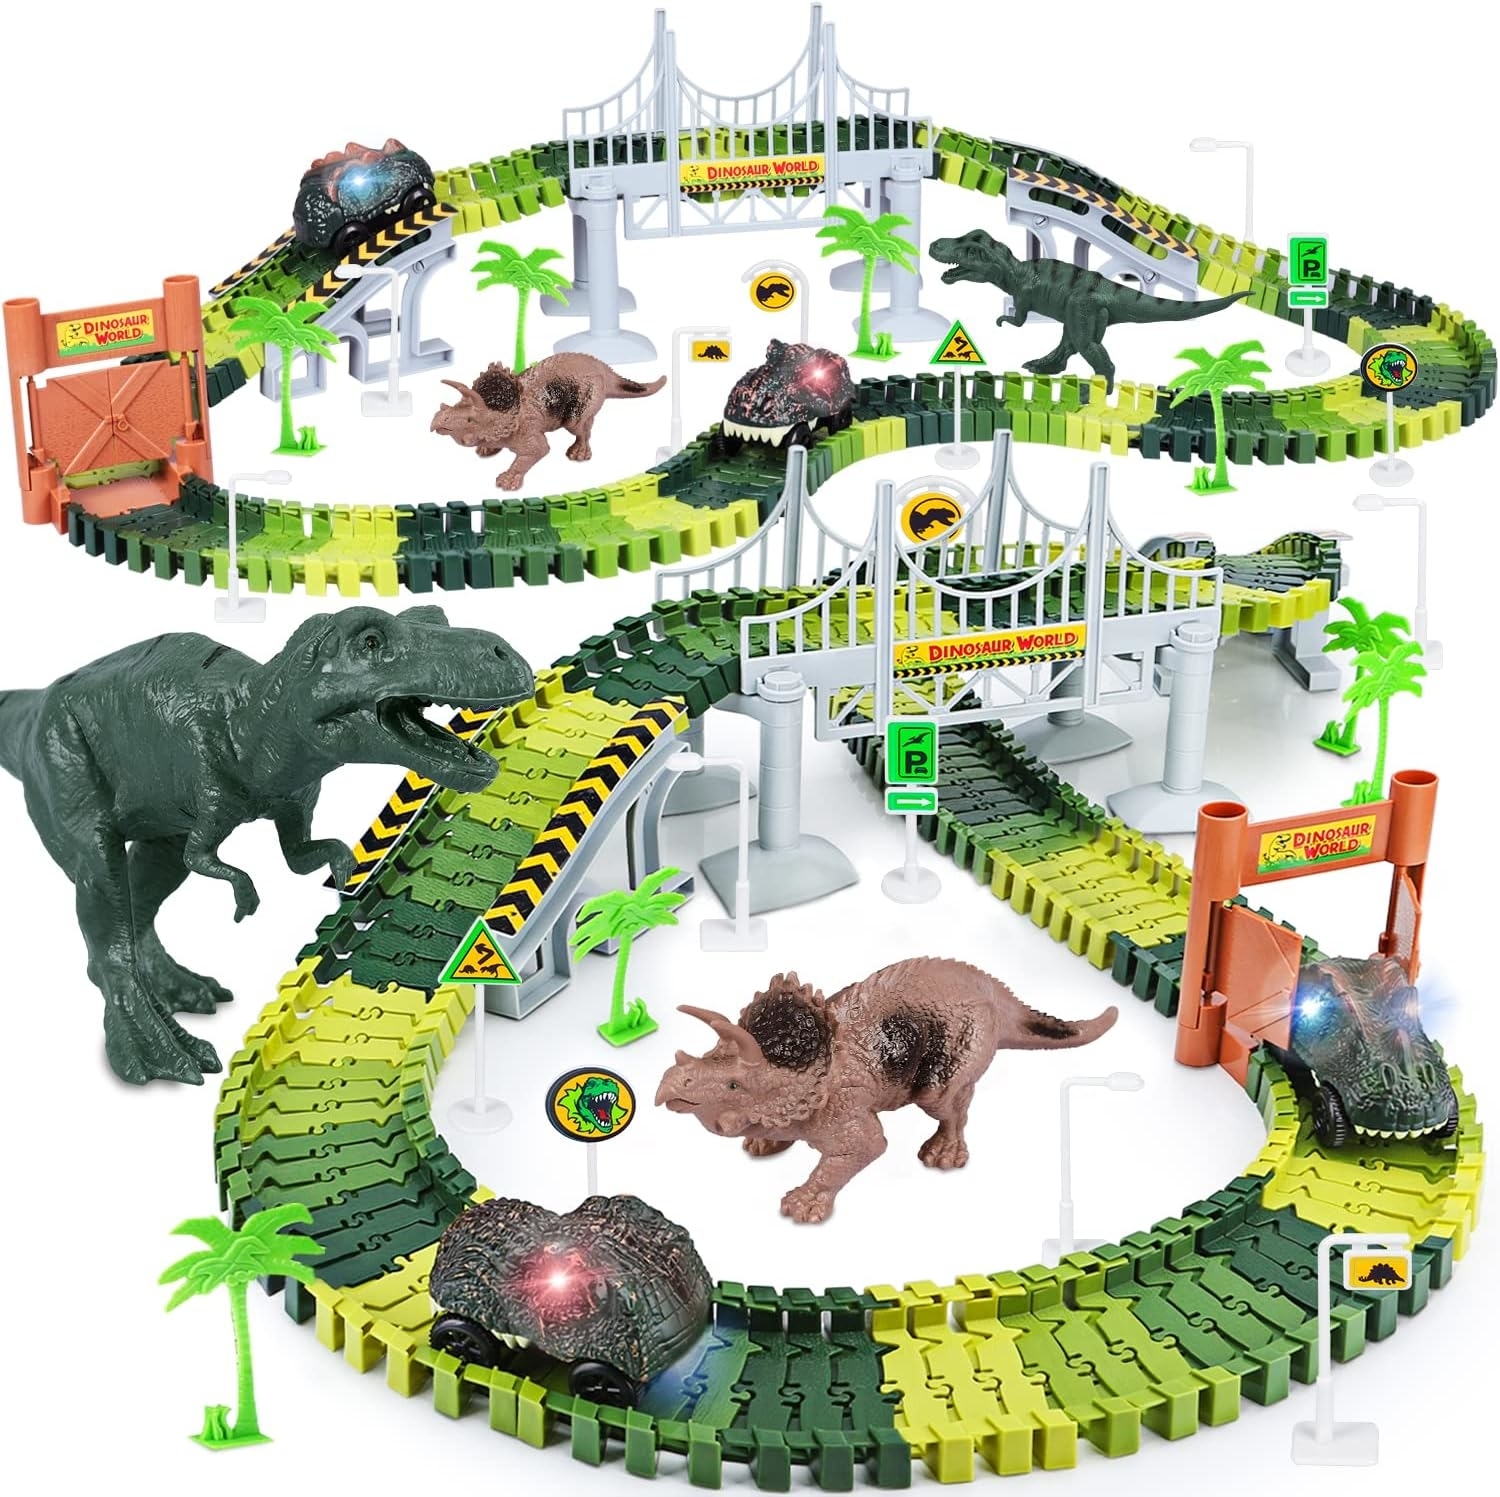 The green track with brides and dino cars